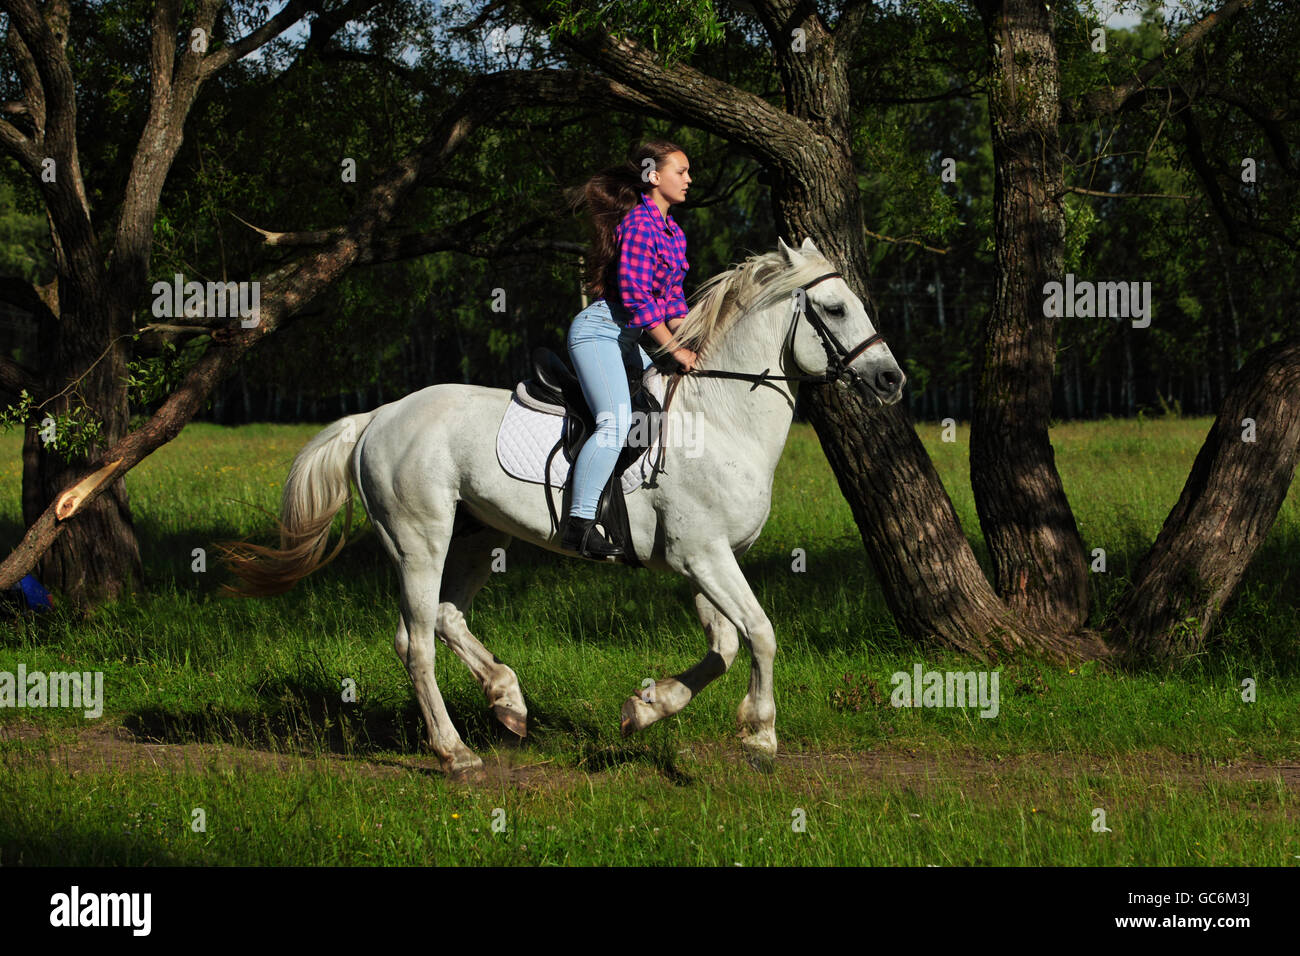 Cheerful cowgirl and her galloping horse Stock Photo